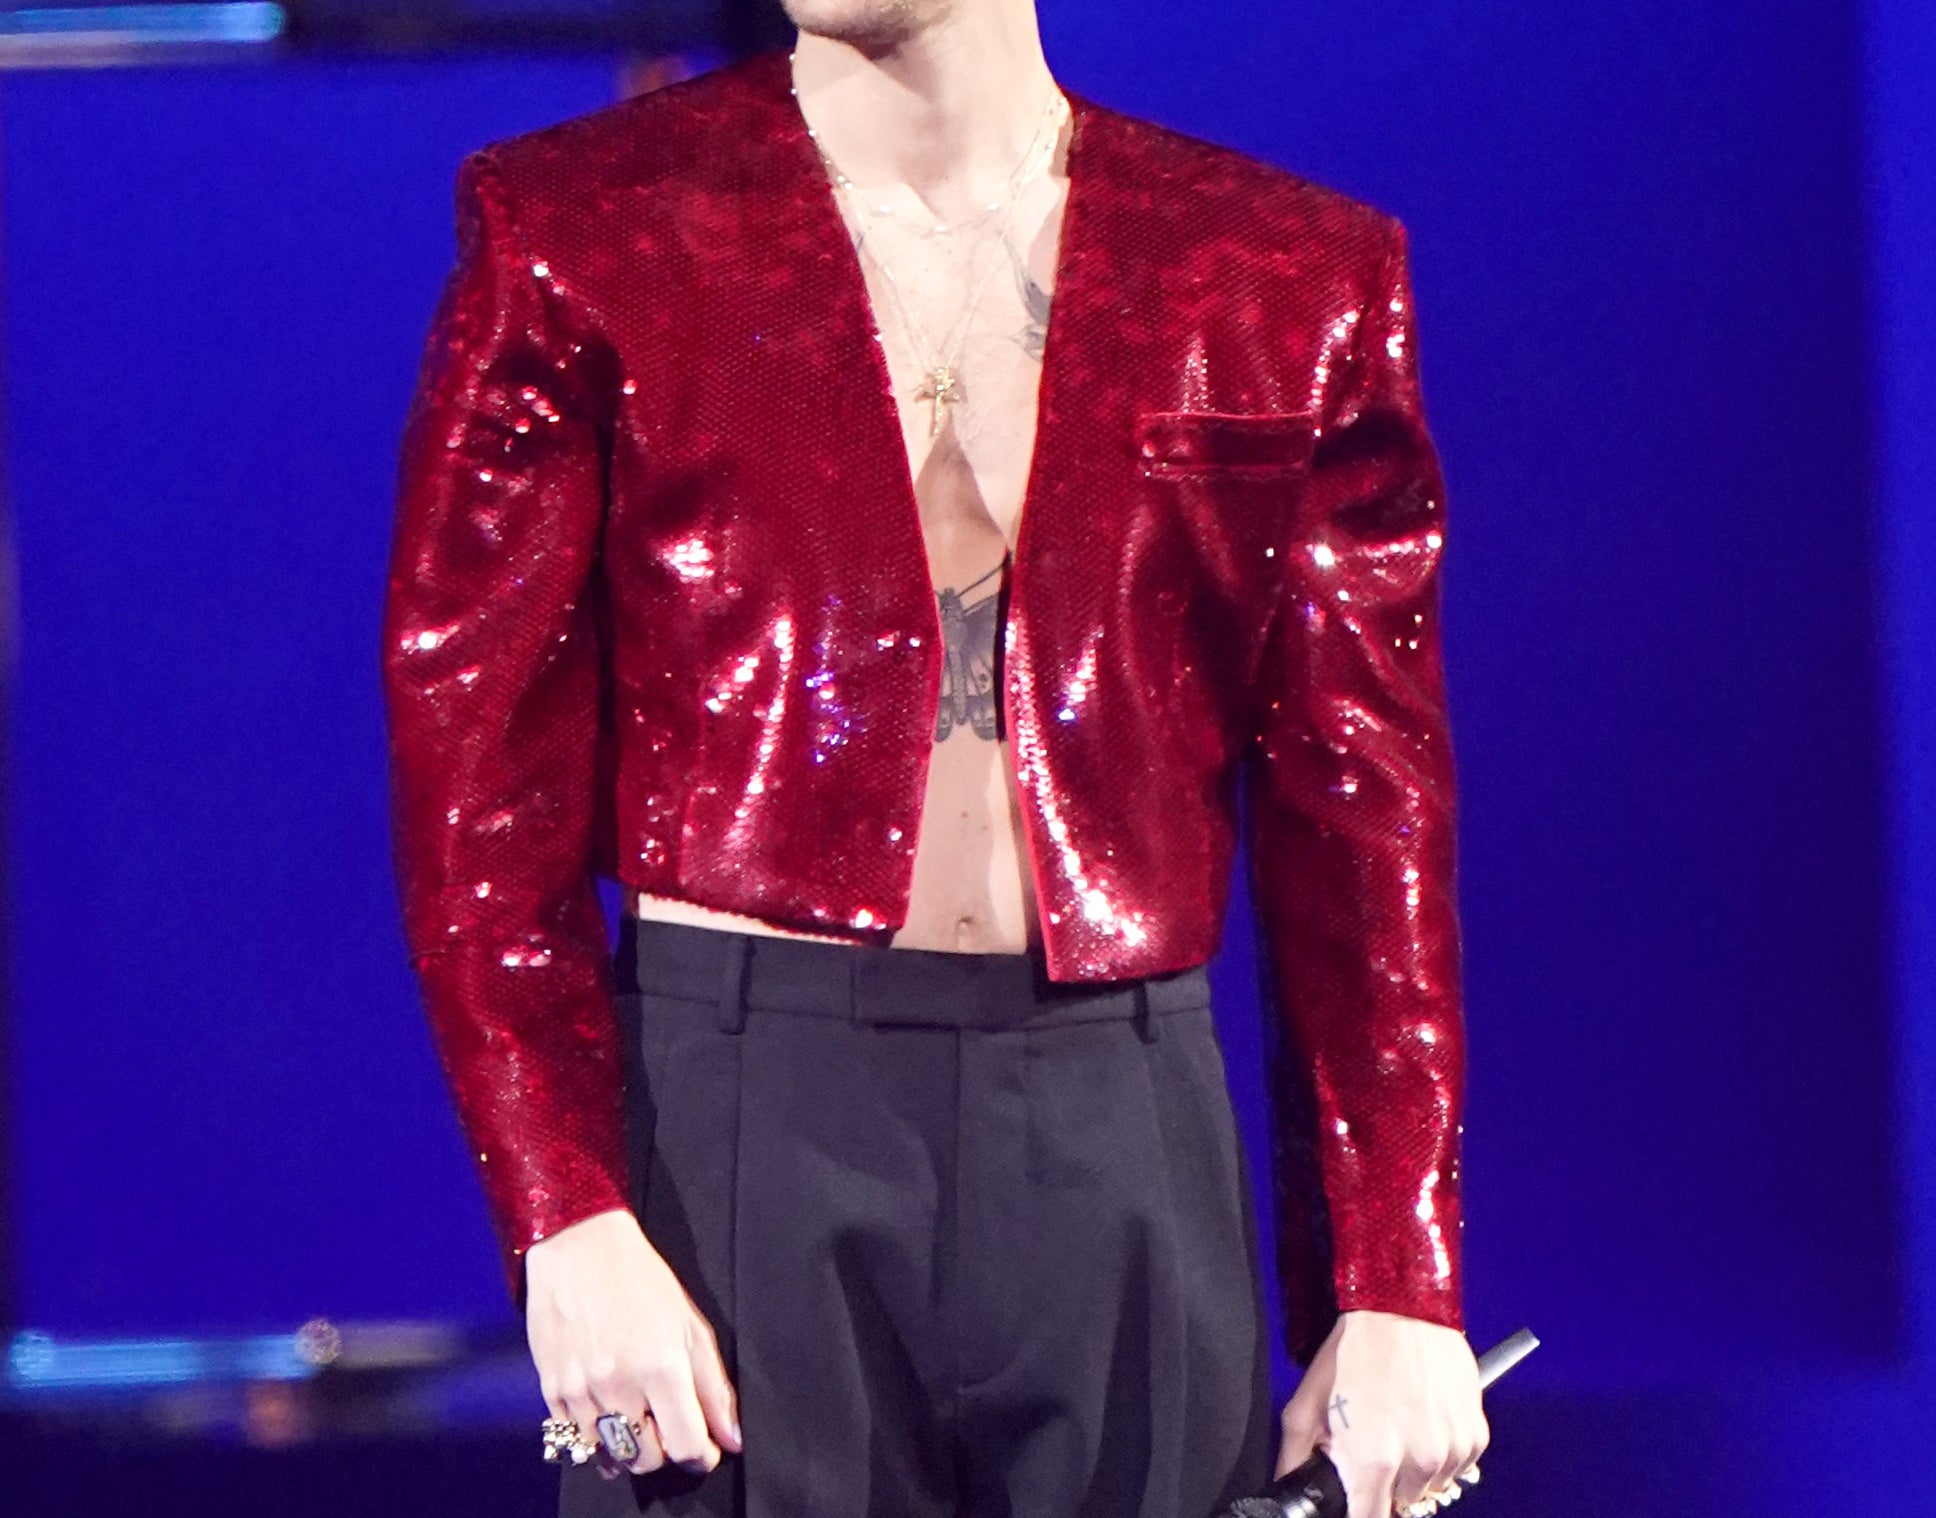 A close-up of Harry smiling in a shiny cropped jacket and bare-chested